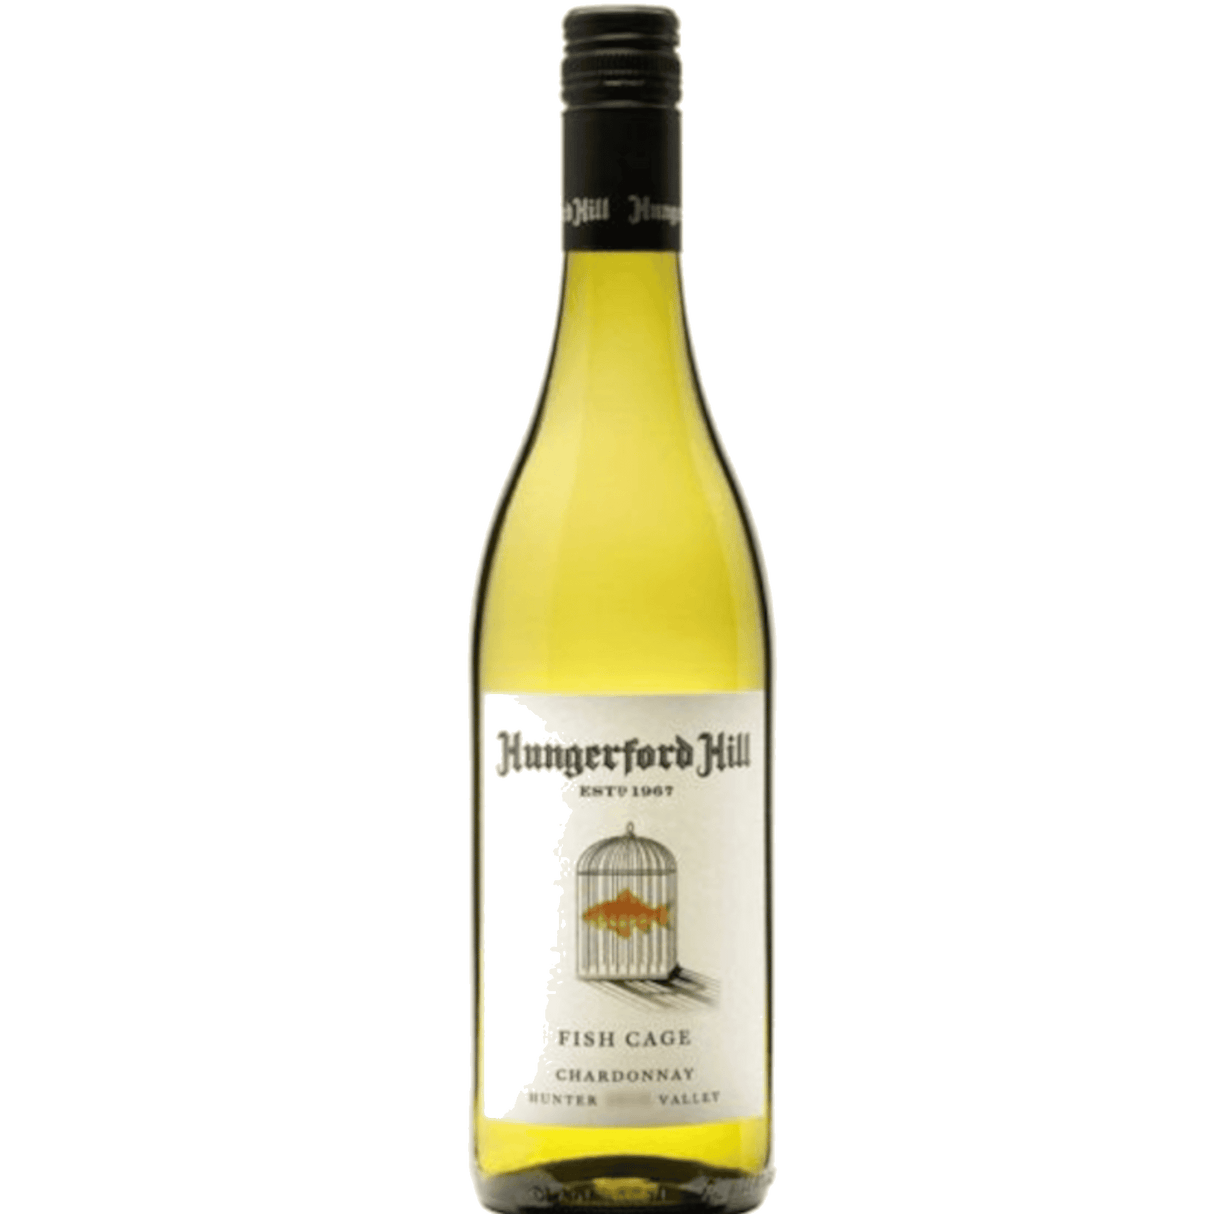 Hungerford Hill Fish Cage Chardonnay 750ml